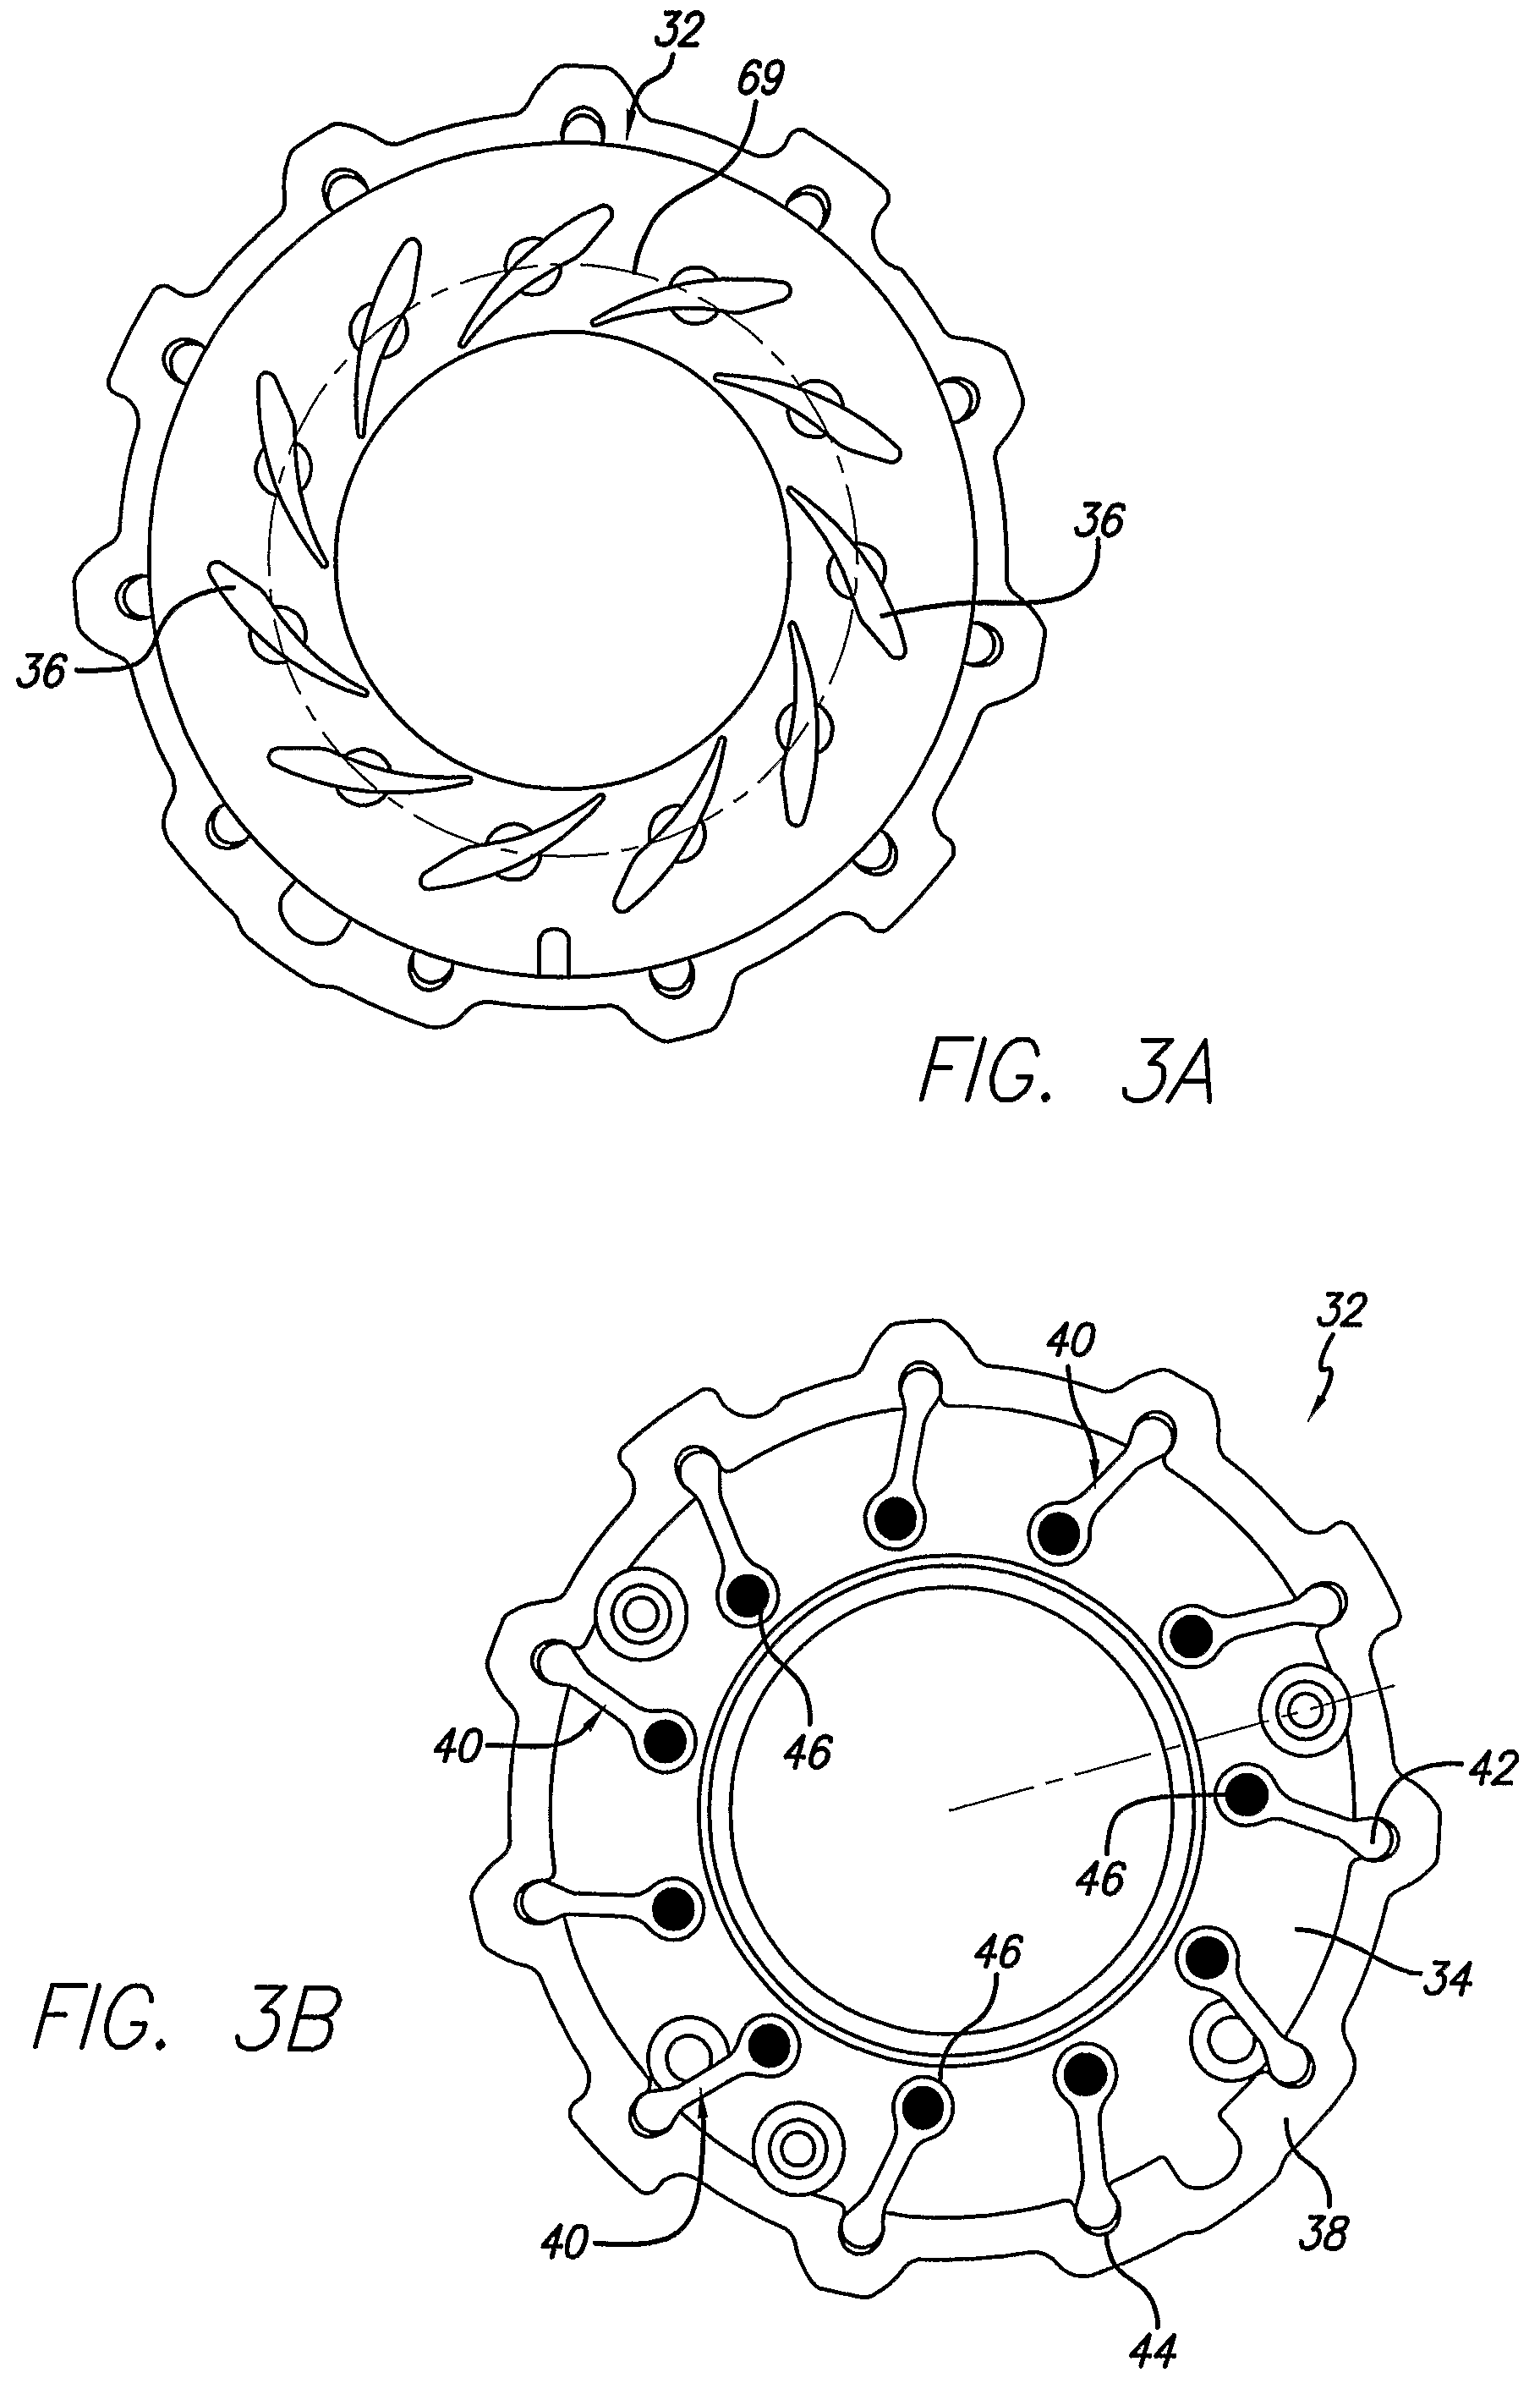 Cambered vane for use in turbochargers